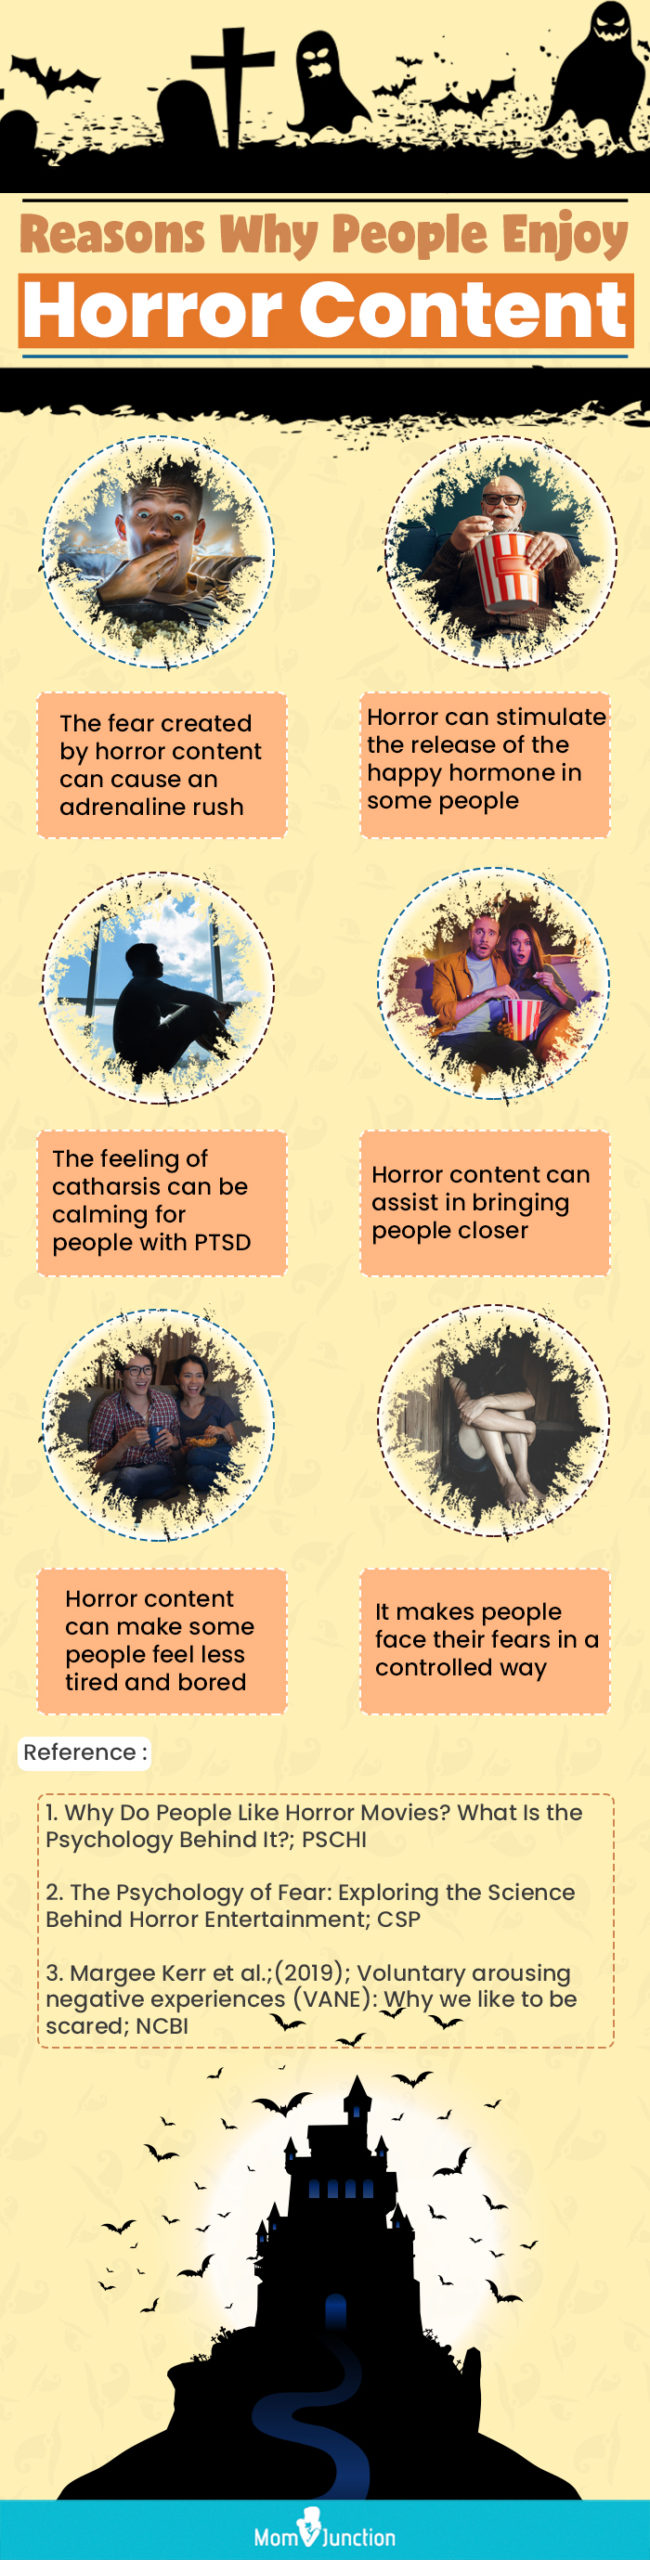 Reasons Why People Enjoy Horror Content (infographic)